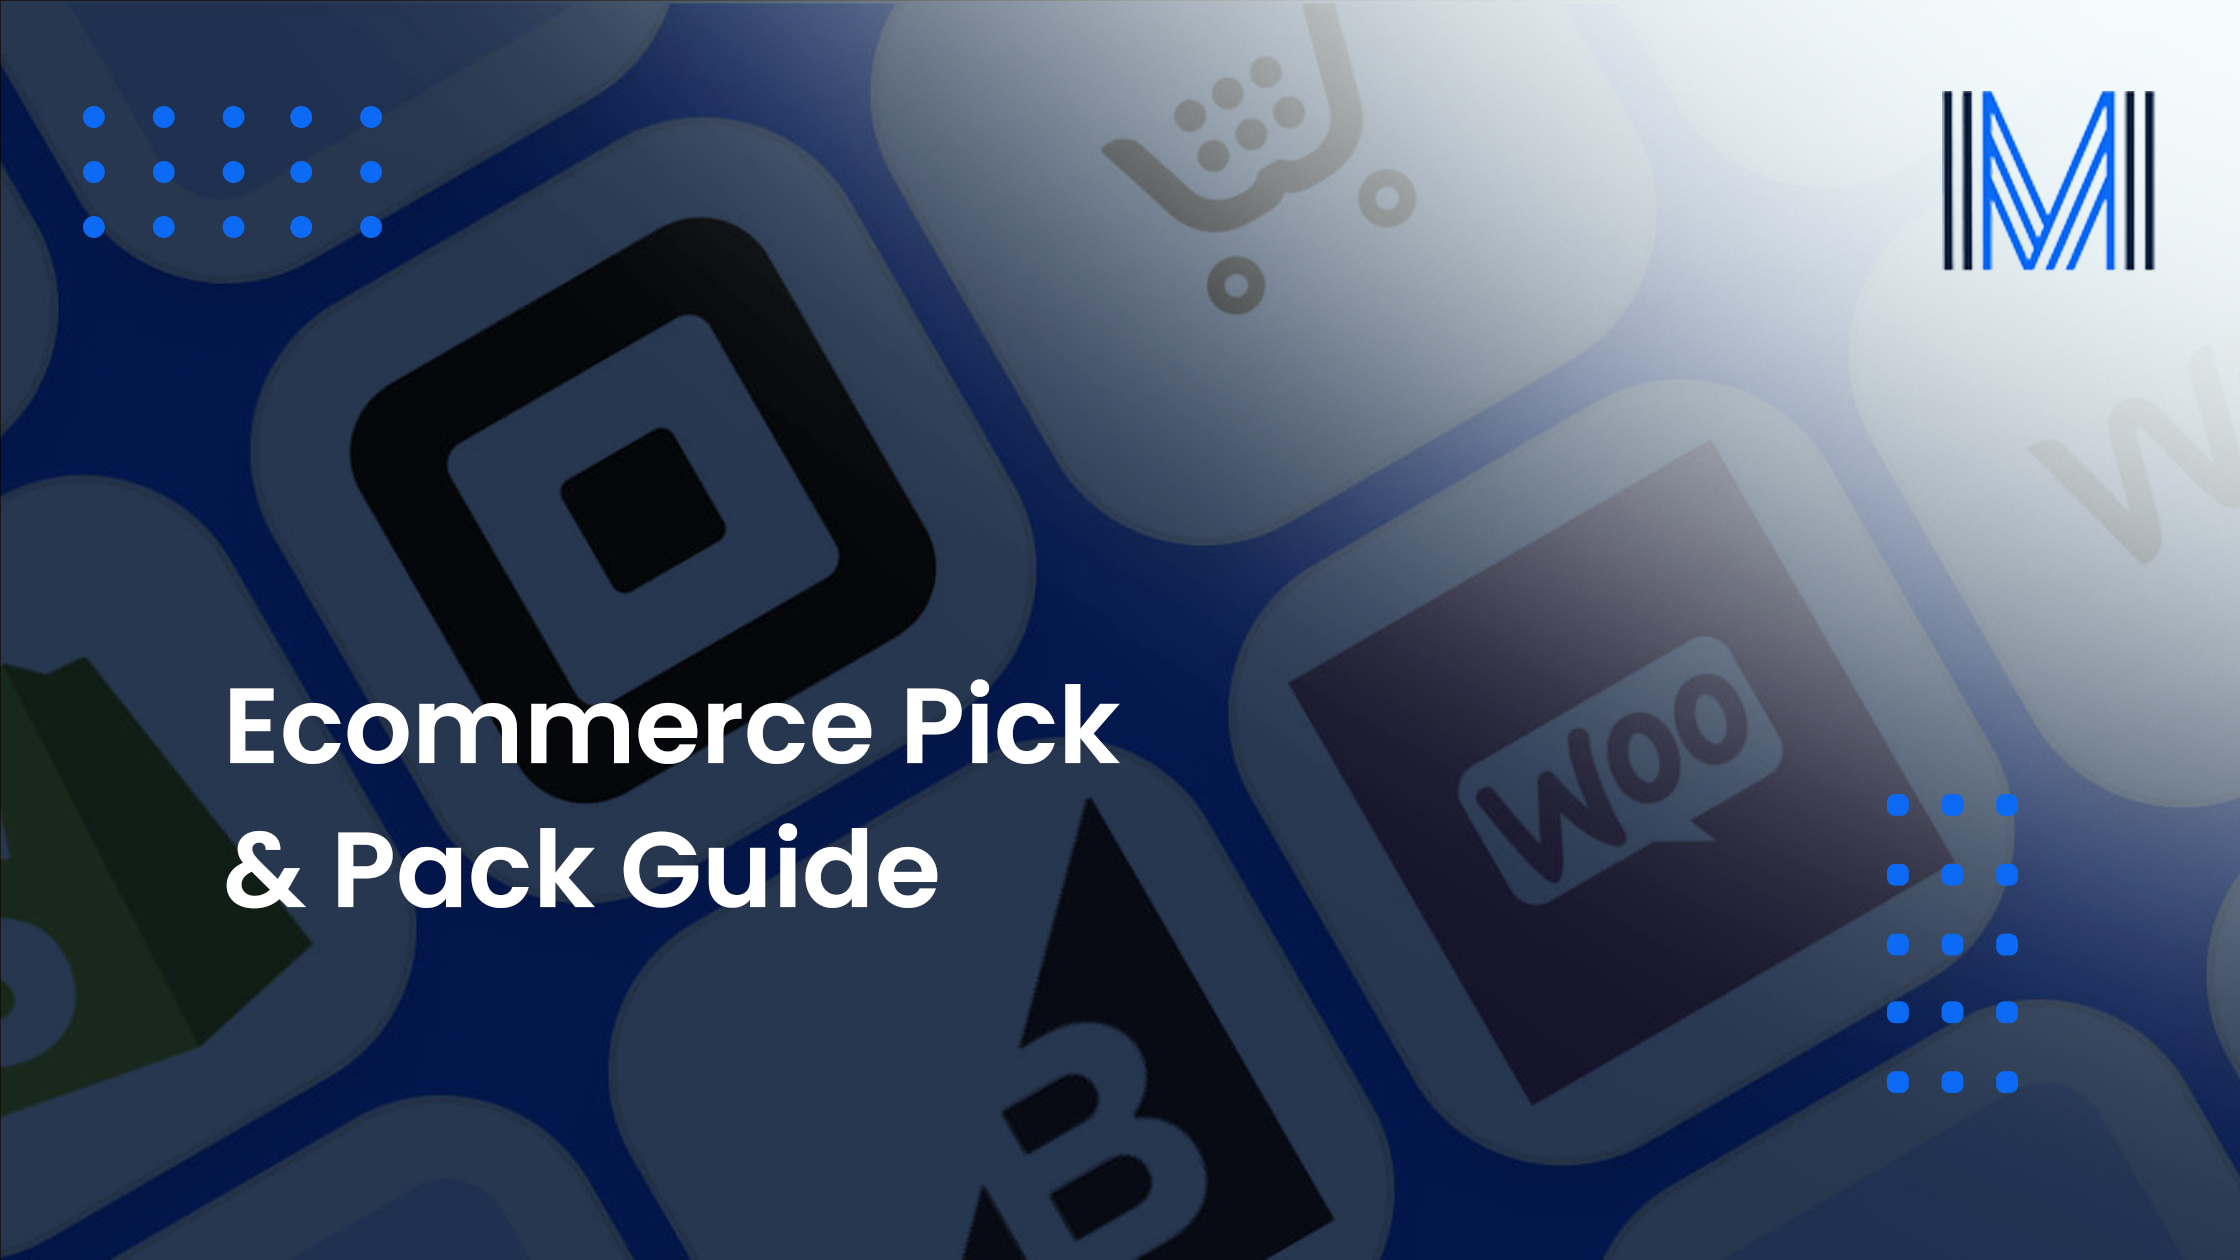 Ecommerce Pick & Pack Guide